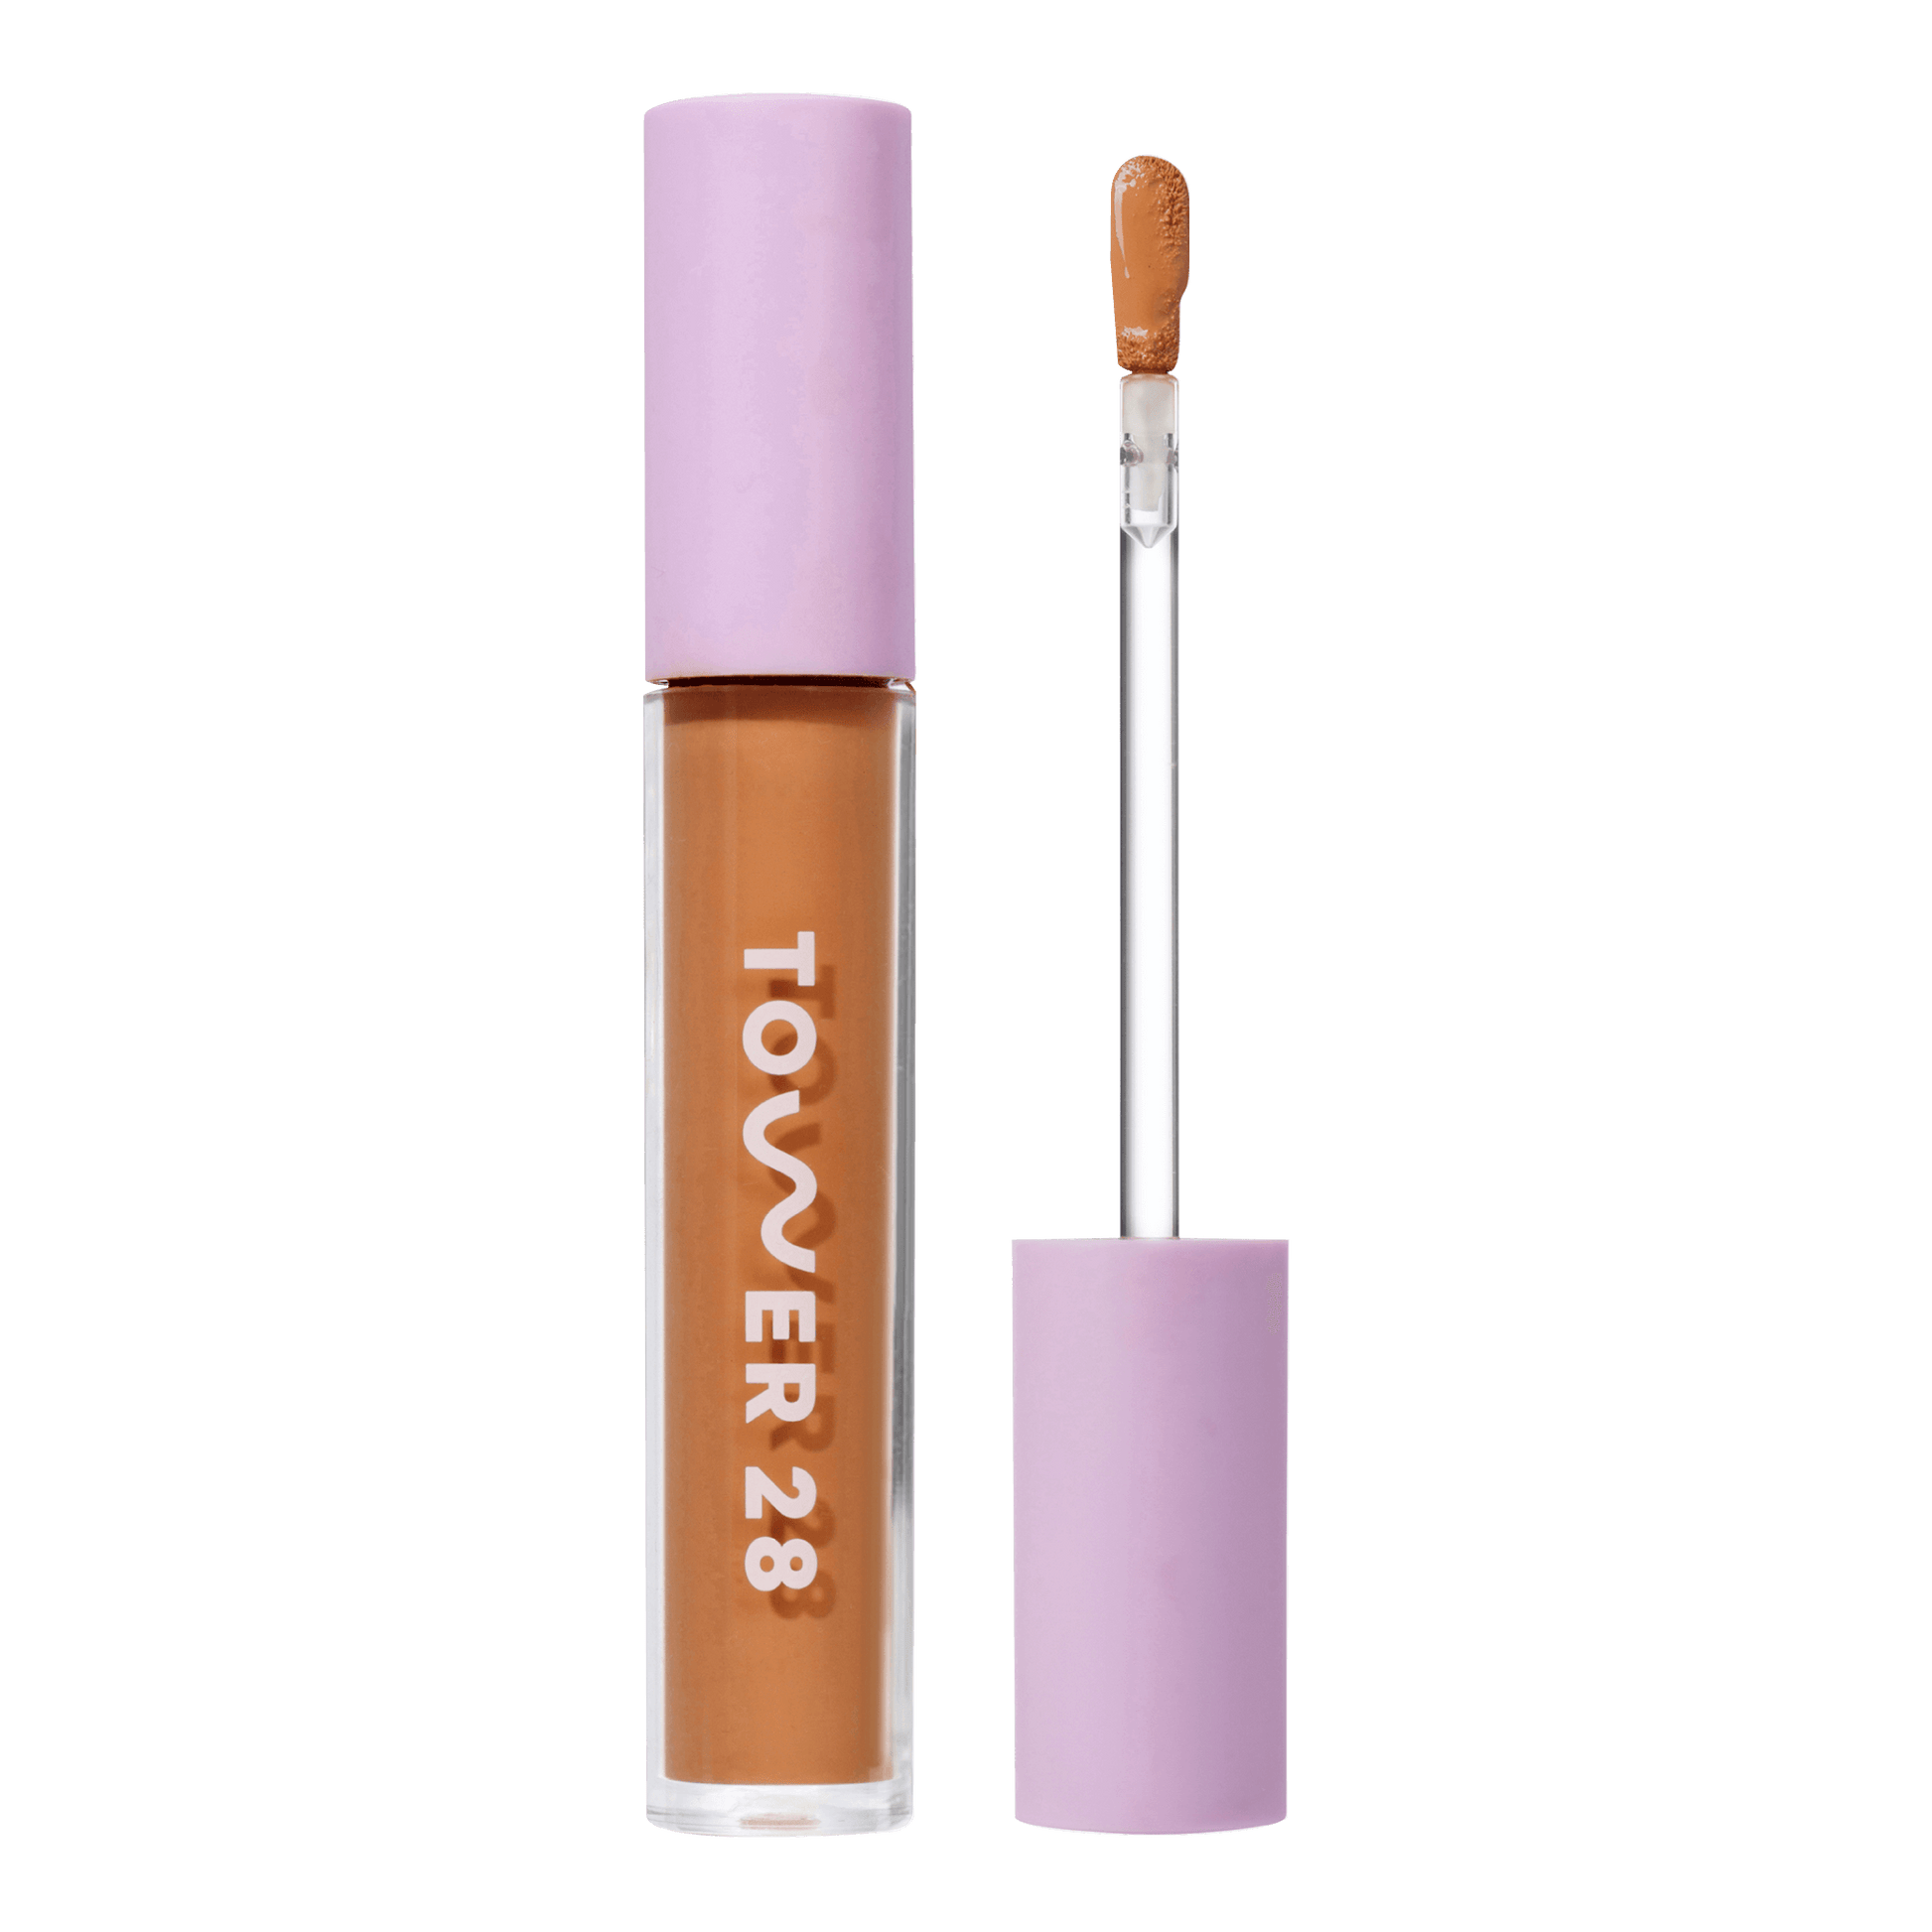 Tower 28 Beauty Swipe Serum Concealer in the shade 14.0 PV